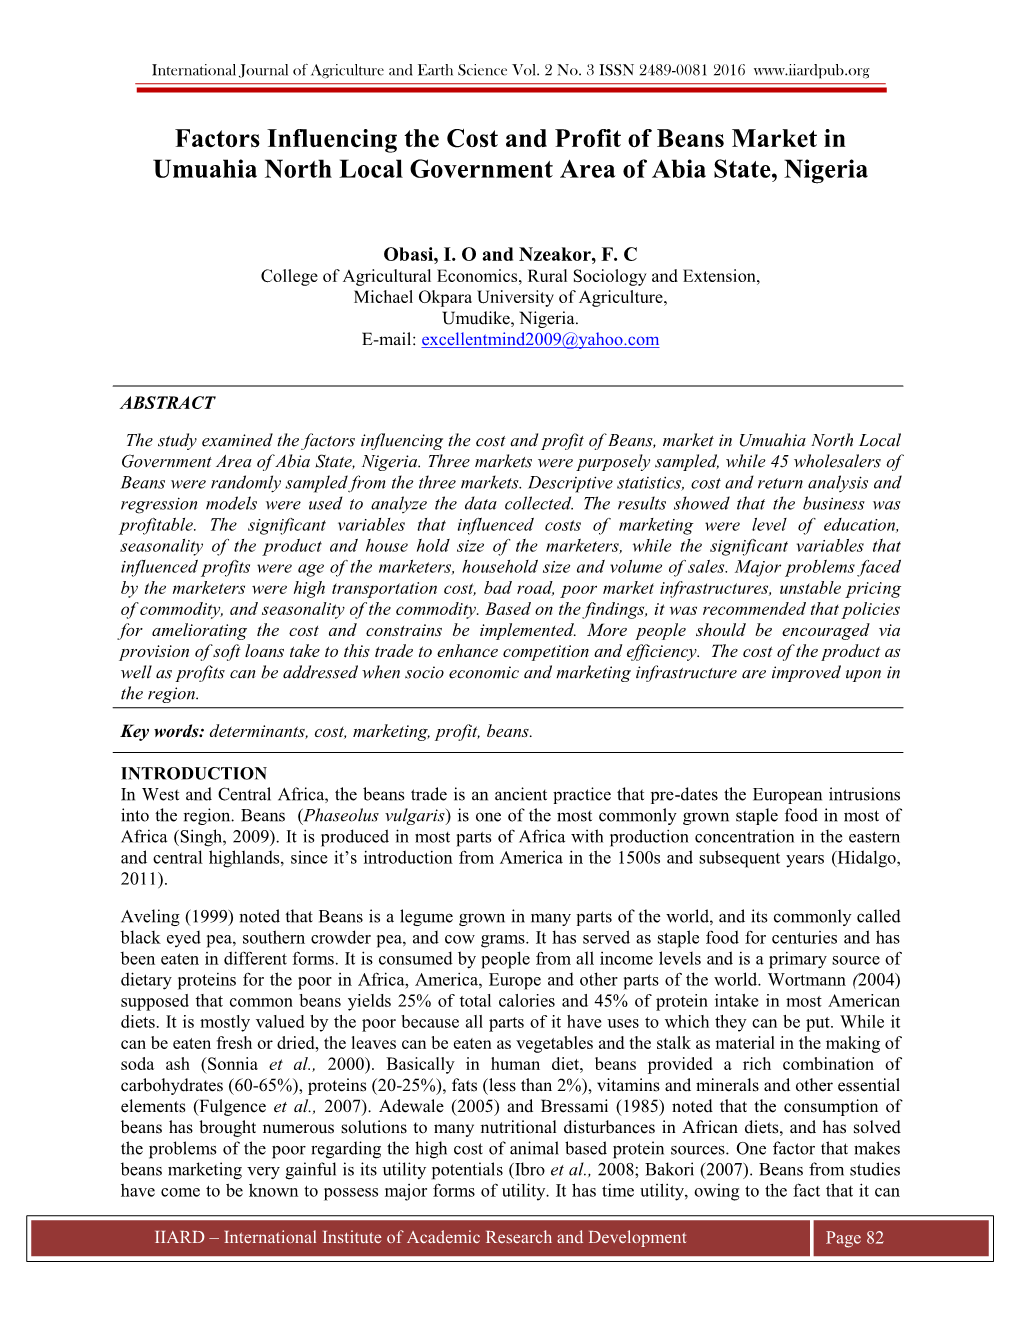 Factors Influencing the Cost and Profit of Beans Market in Umuahia North Local Government Area of Abia State, Nigeria